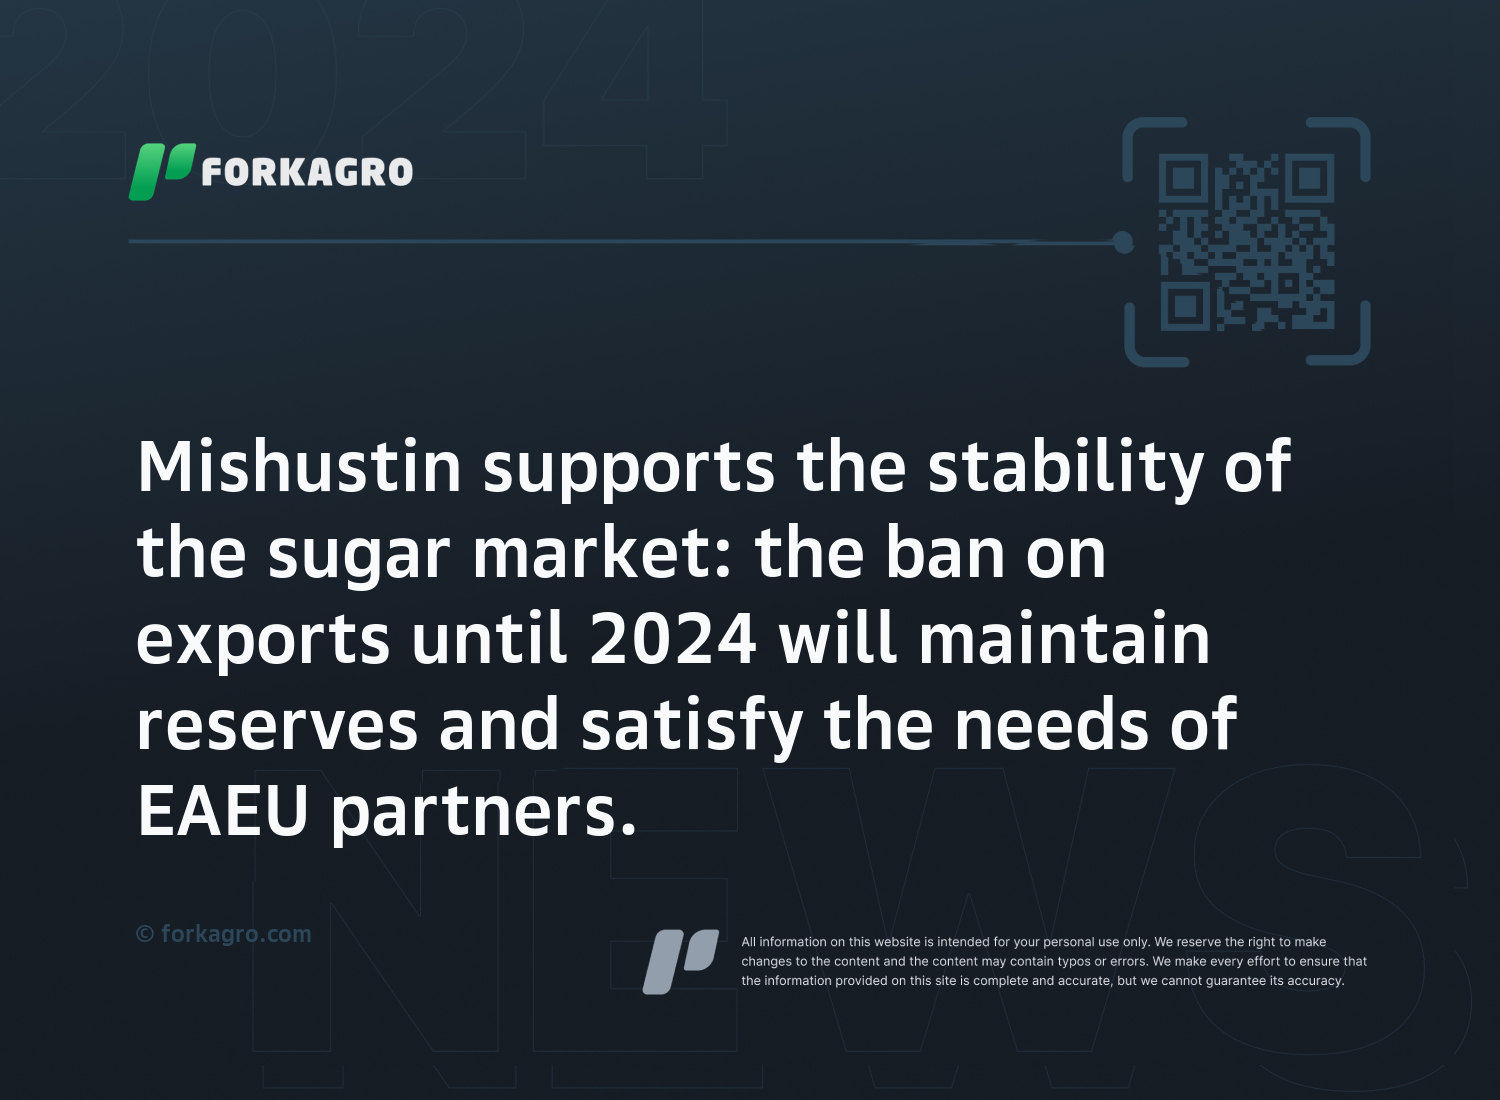 Mishustin supports the stability of the sugar market: the ban on exports until 2024 will maintain reserves and satisfy the needs of EAEU partners.